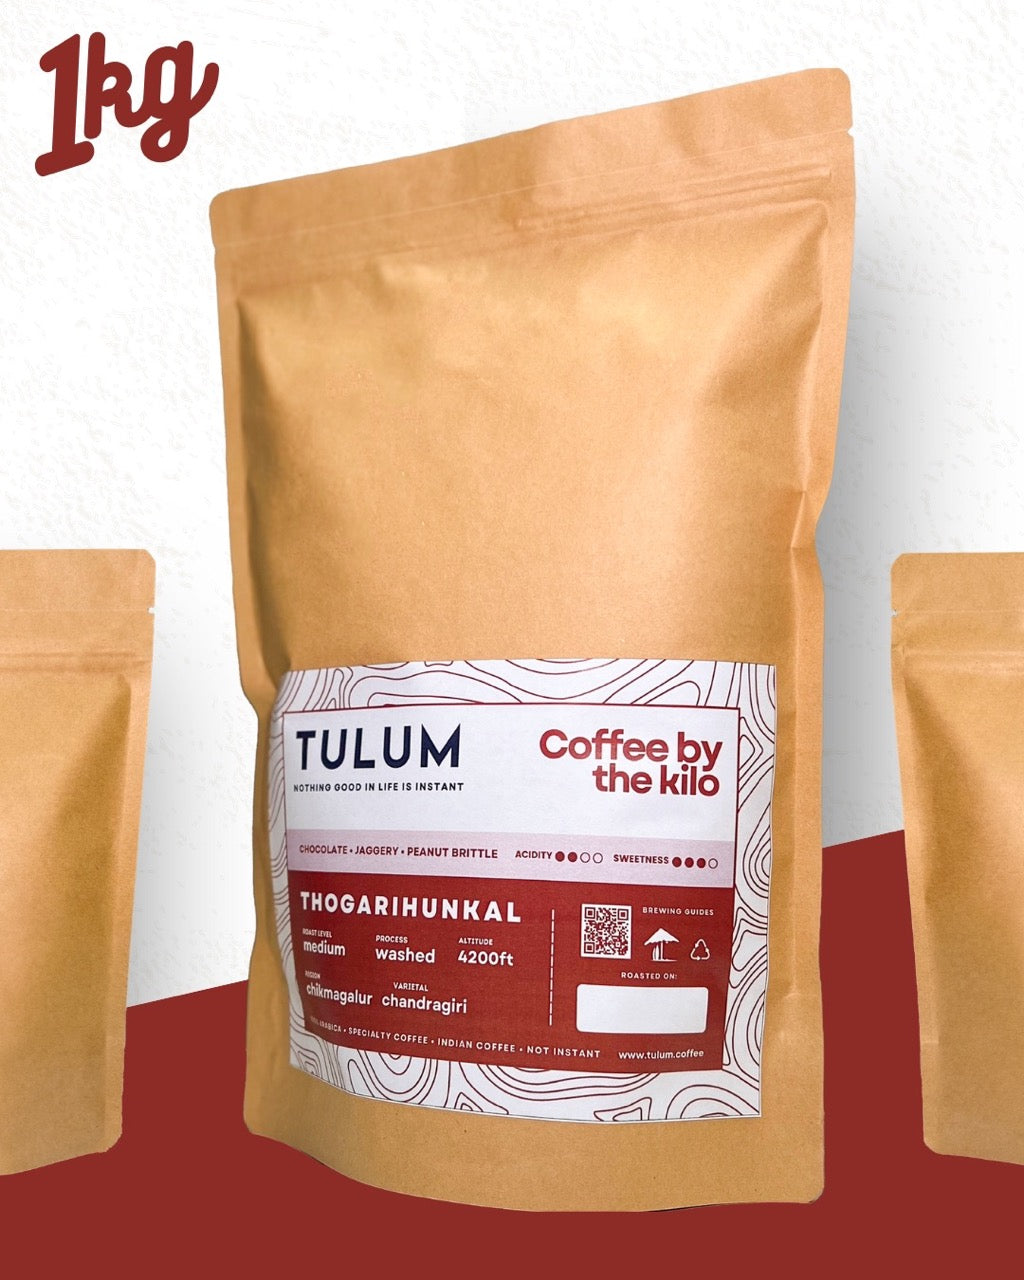 Coffee By the Kilo by Tulum Coffee in Brown Resealable Packet which is Thogarihunkal Washed and Arabica Coffee with Chocolatey Flavour Notes.